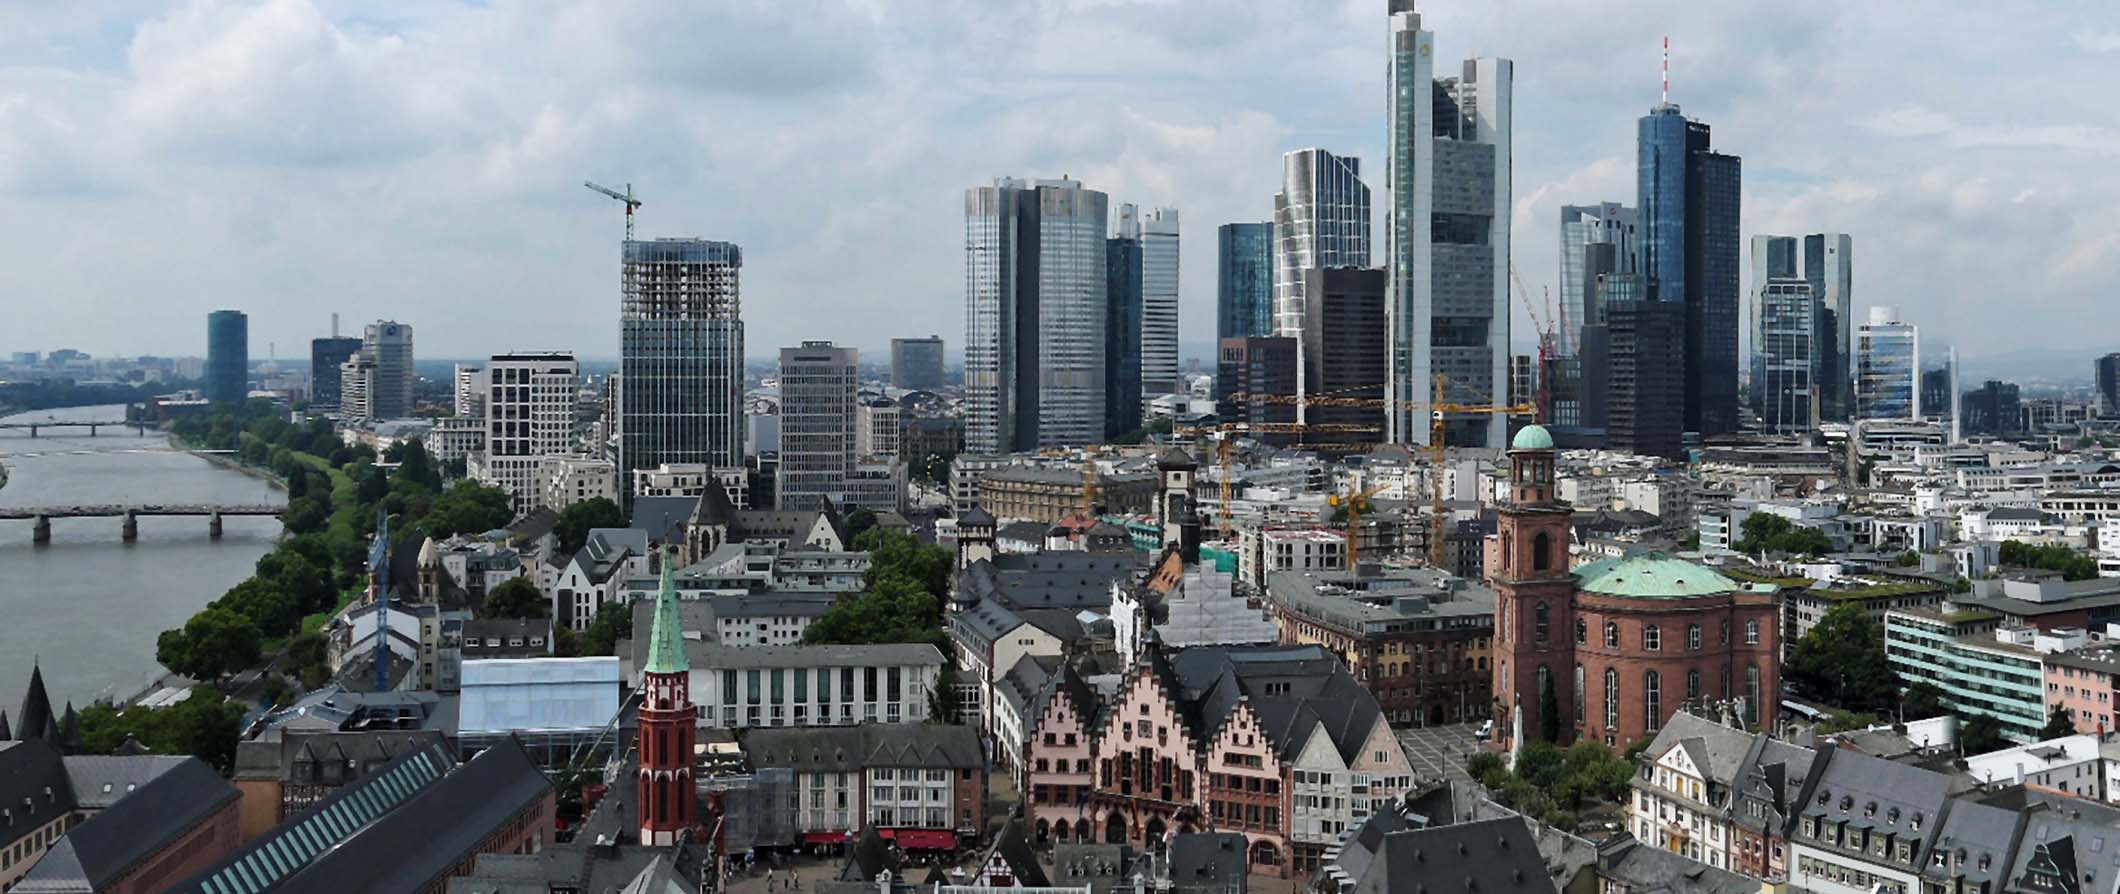 An aerial view of downtown Frankfurt, Germany featuring numerous skyscrapers